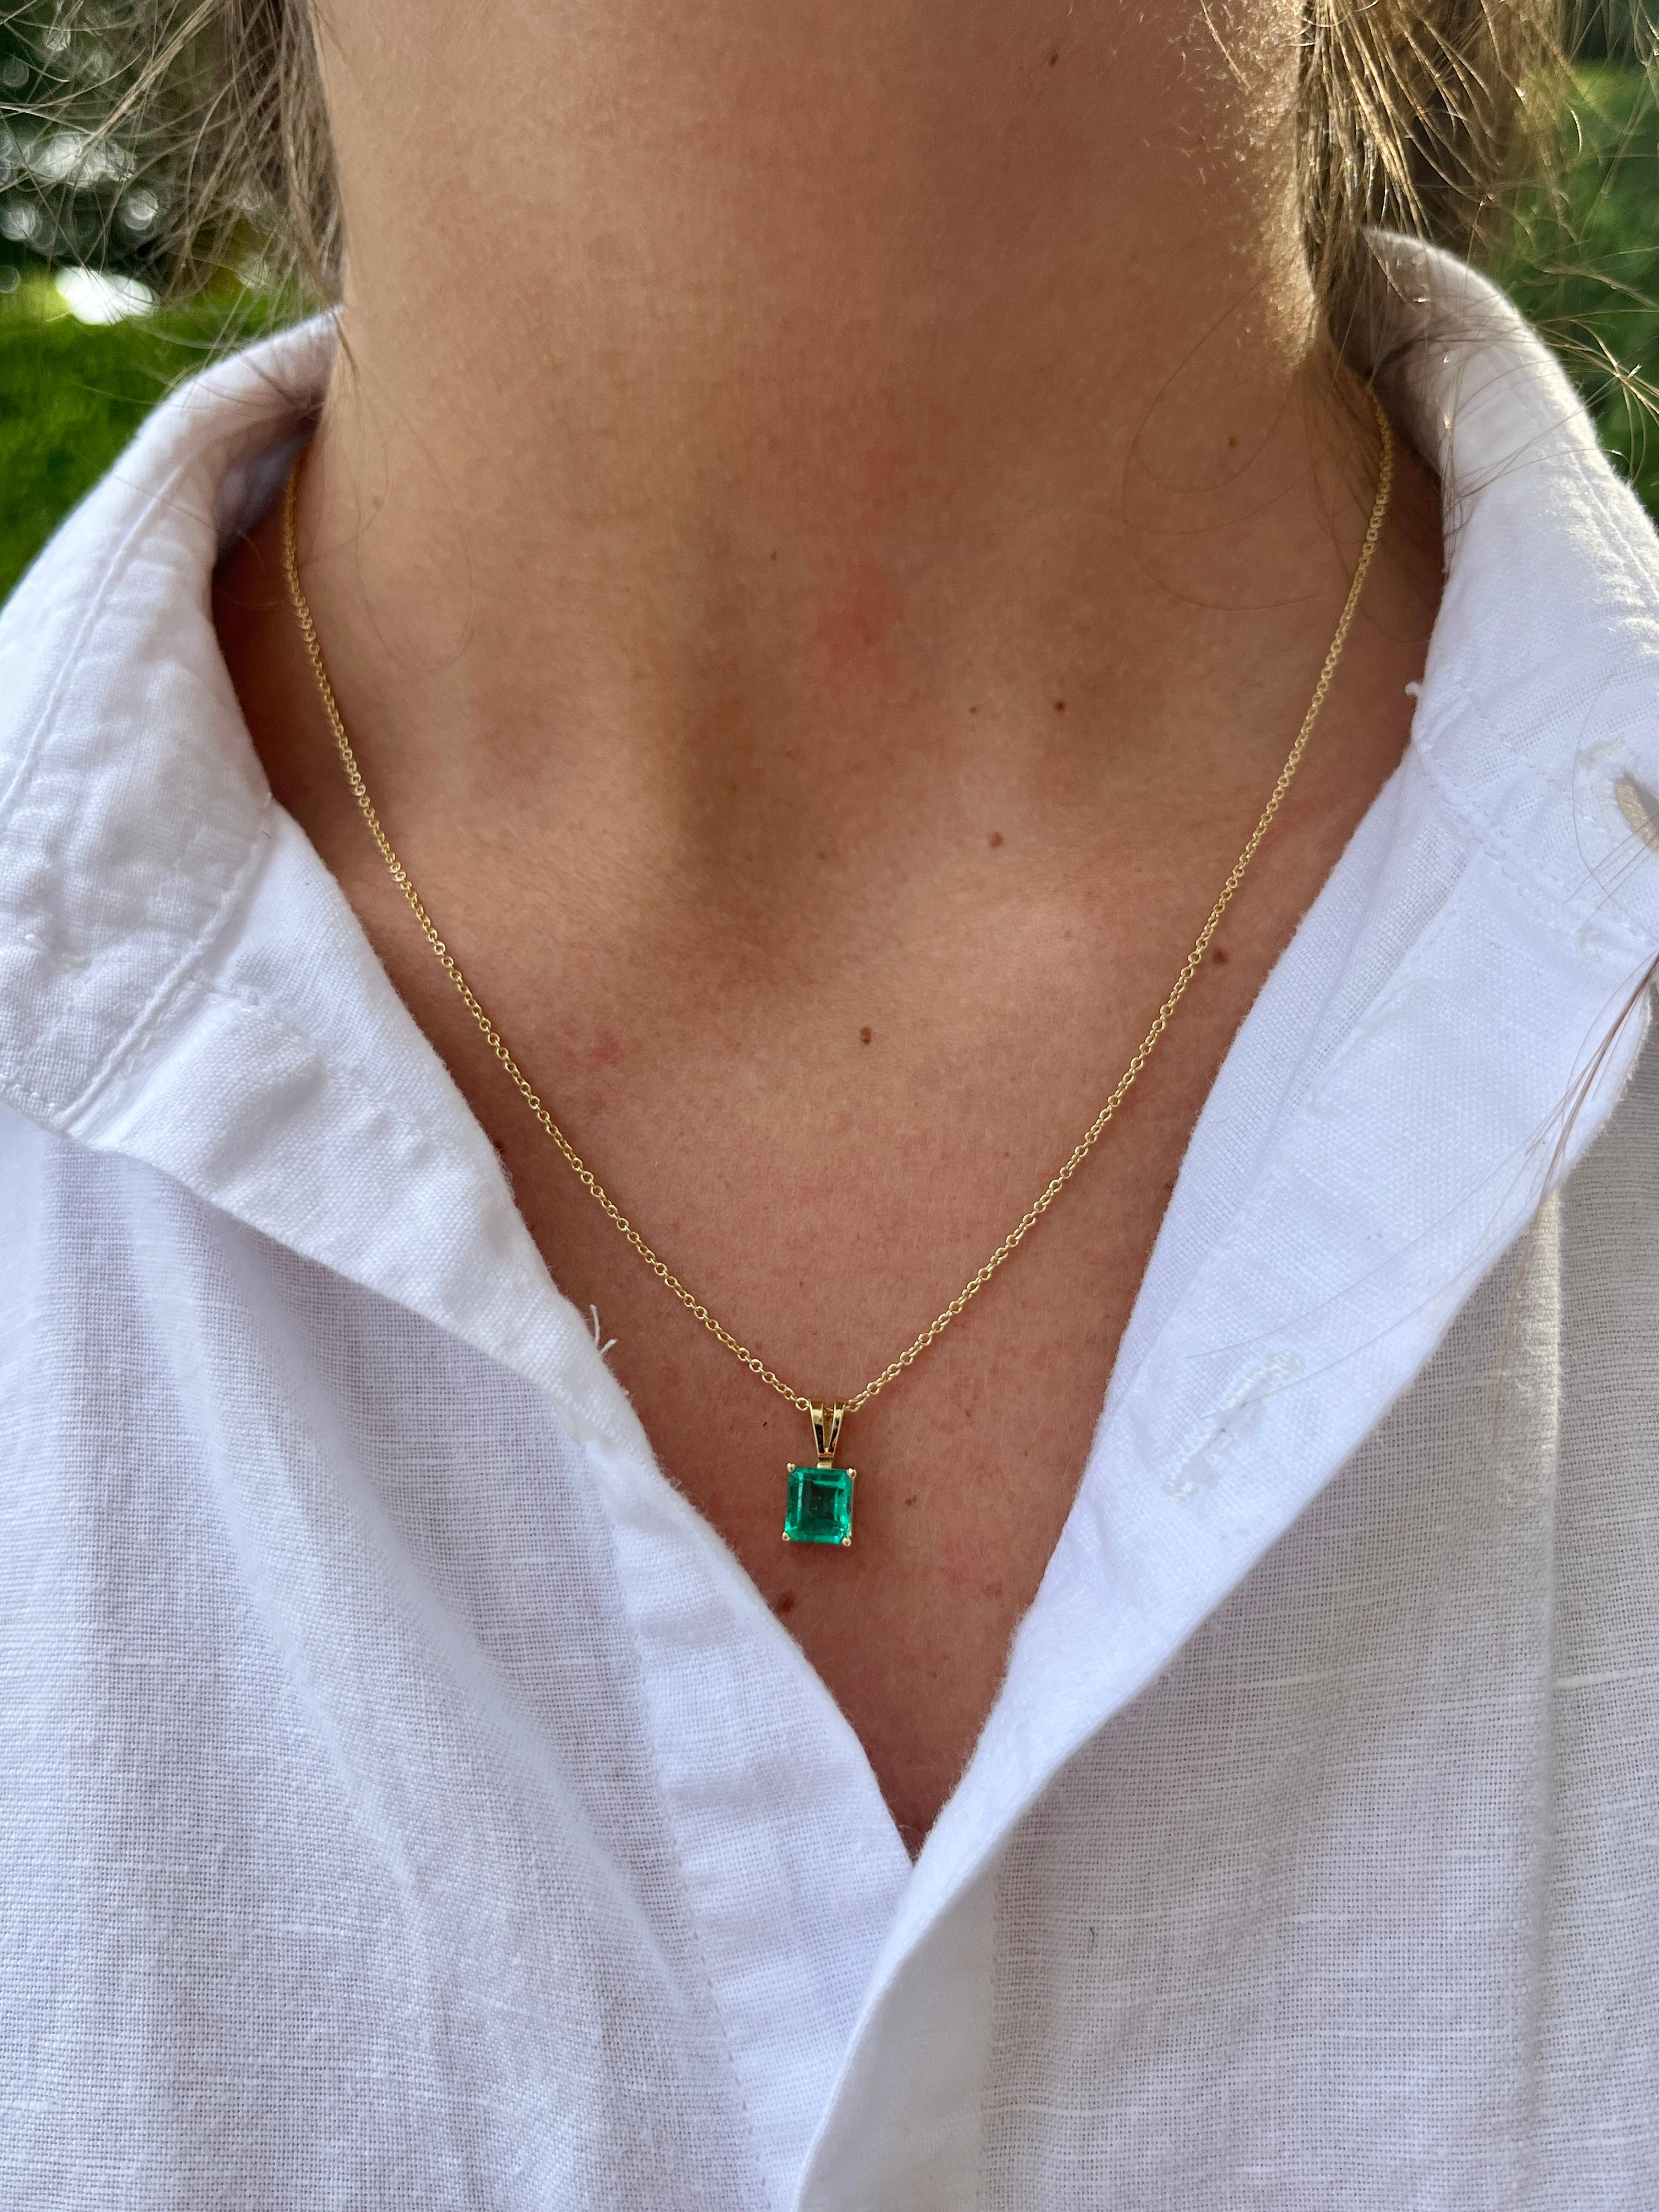 Women's or Men's 1.20 Carat Colombian Emerald Solitaire Pendant Necklace in 18K Yellow Gold